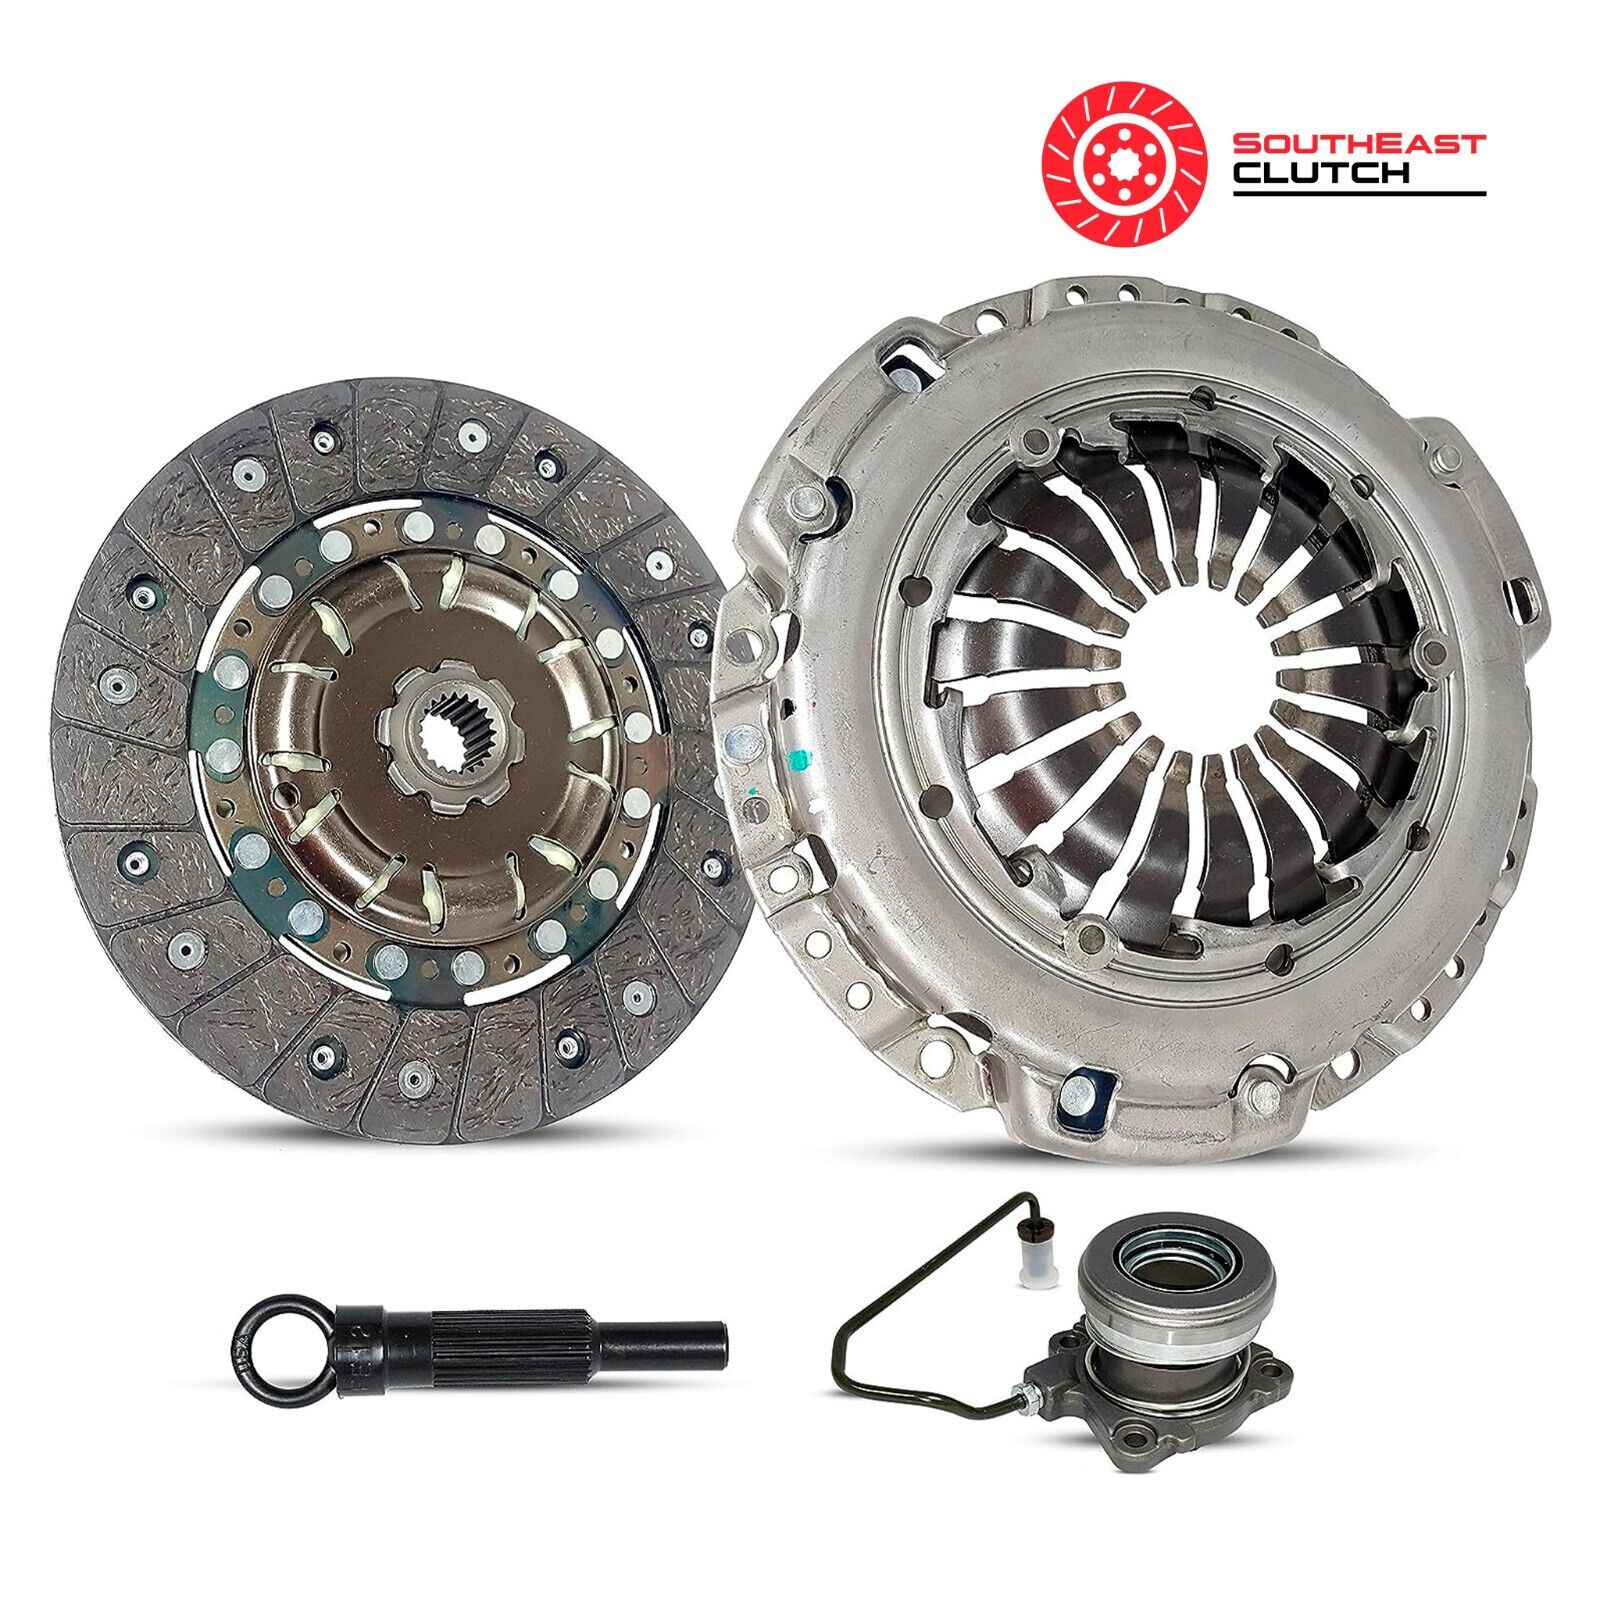 SECLUTCH Clutch And Slave Kit for 11-14 CHEVROLET CRUZE SONIC 1.4L 1.8L